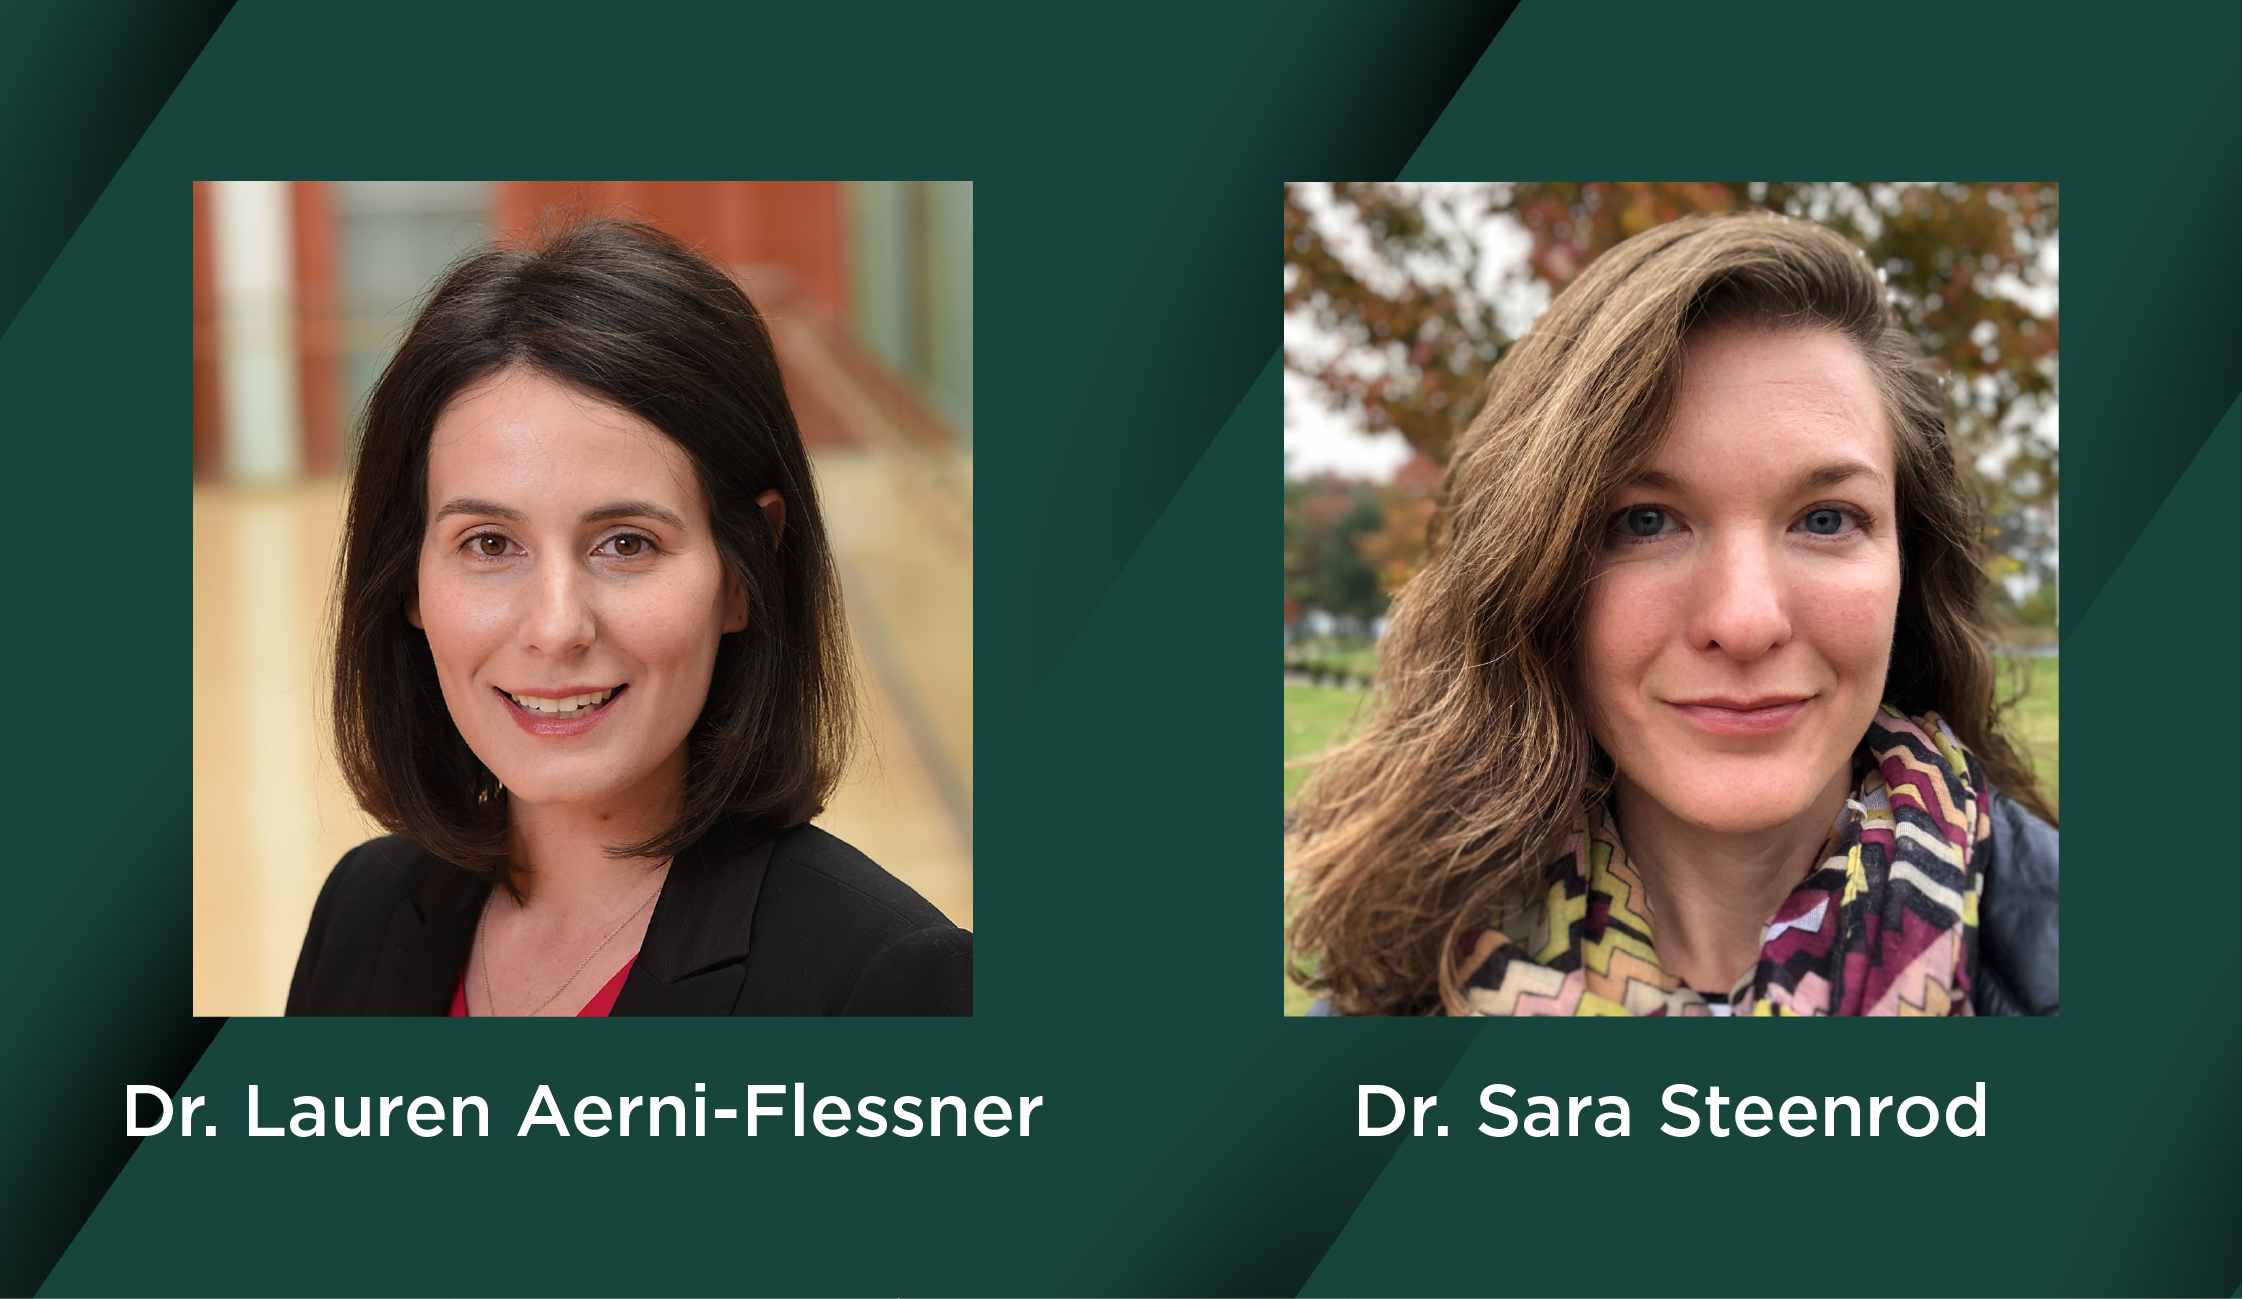 Left, Dr. Lauren Aerni-Flessner, a woman with dark brown hair. Right, Dr. Sara Steenrod, a woman with light brown hair